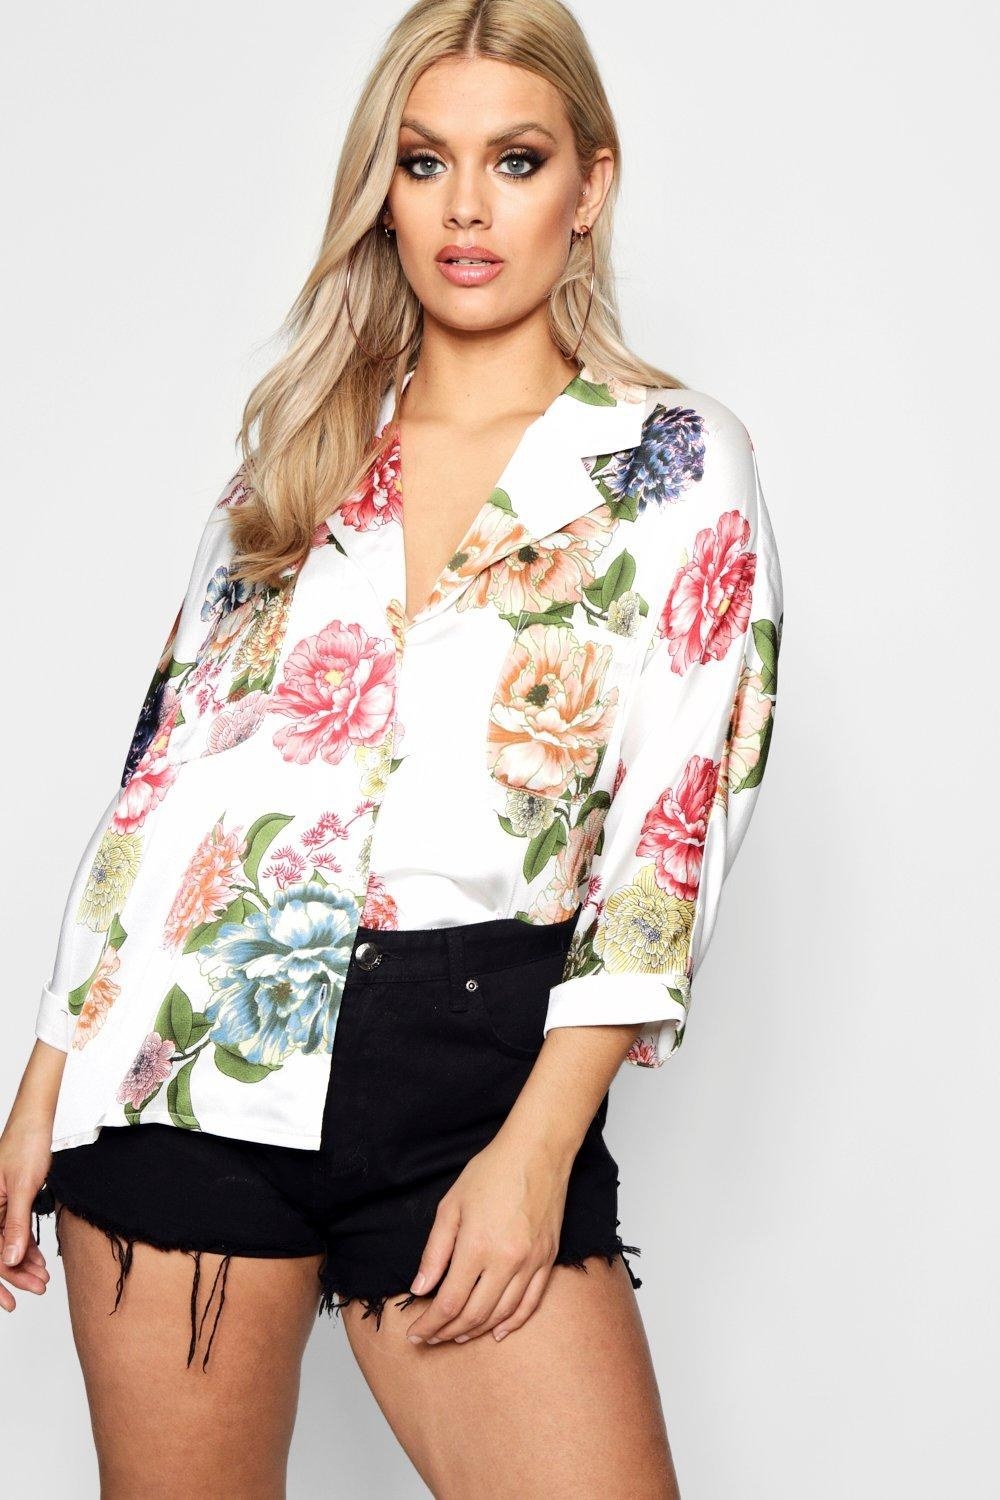 Everything Is 50% Off At Boohoo Right Now, So Get Ready